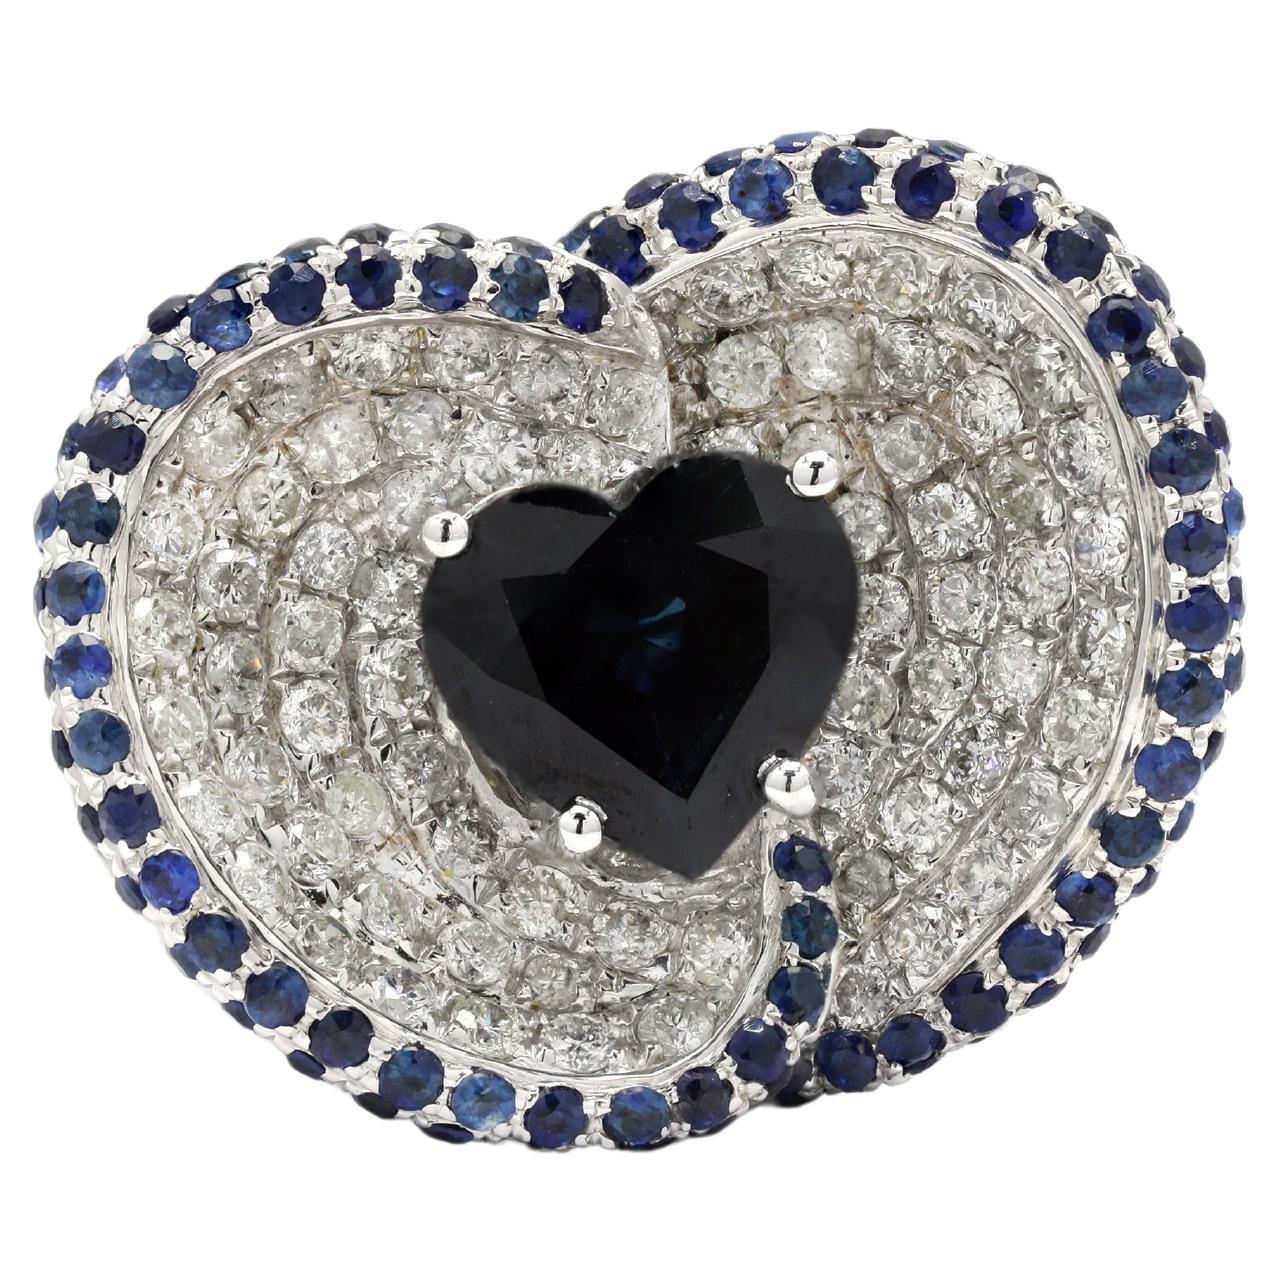 For Sale:  3.35 Carat Heart Cut Blue Sapphire and Diamond Unique Ring in 14K White Gold